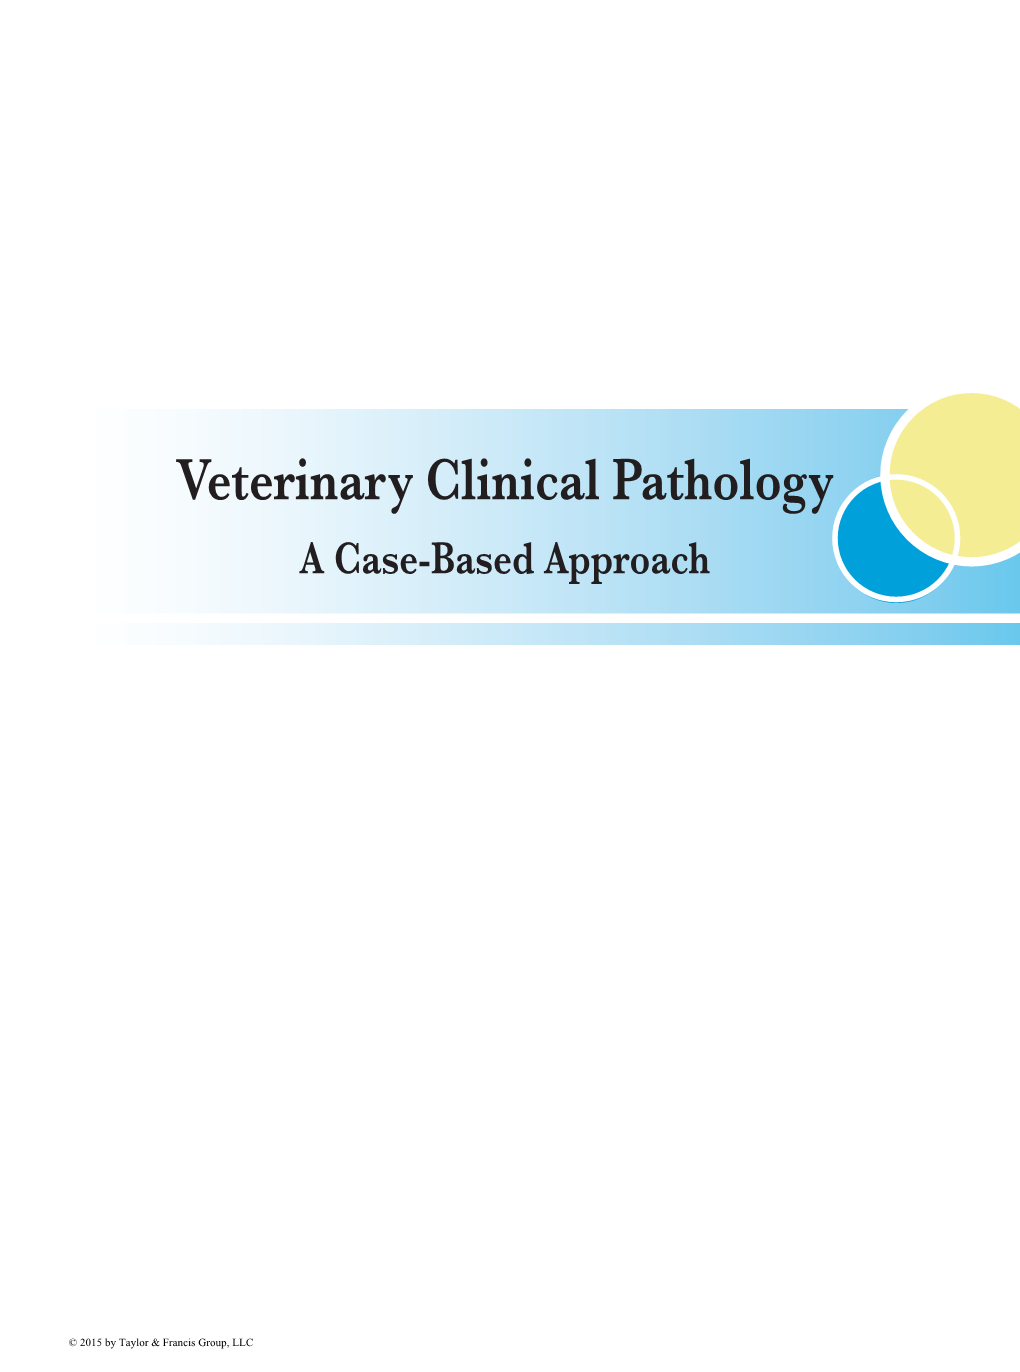 Veterinary Clinical Pathology a Case-Based Approach